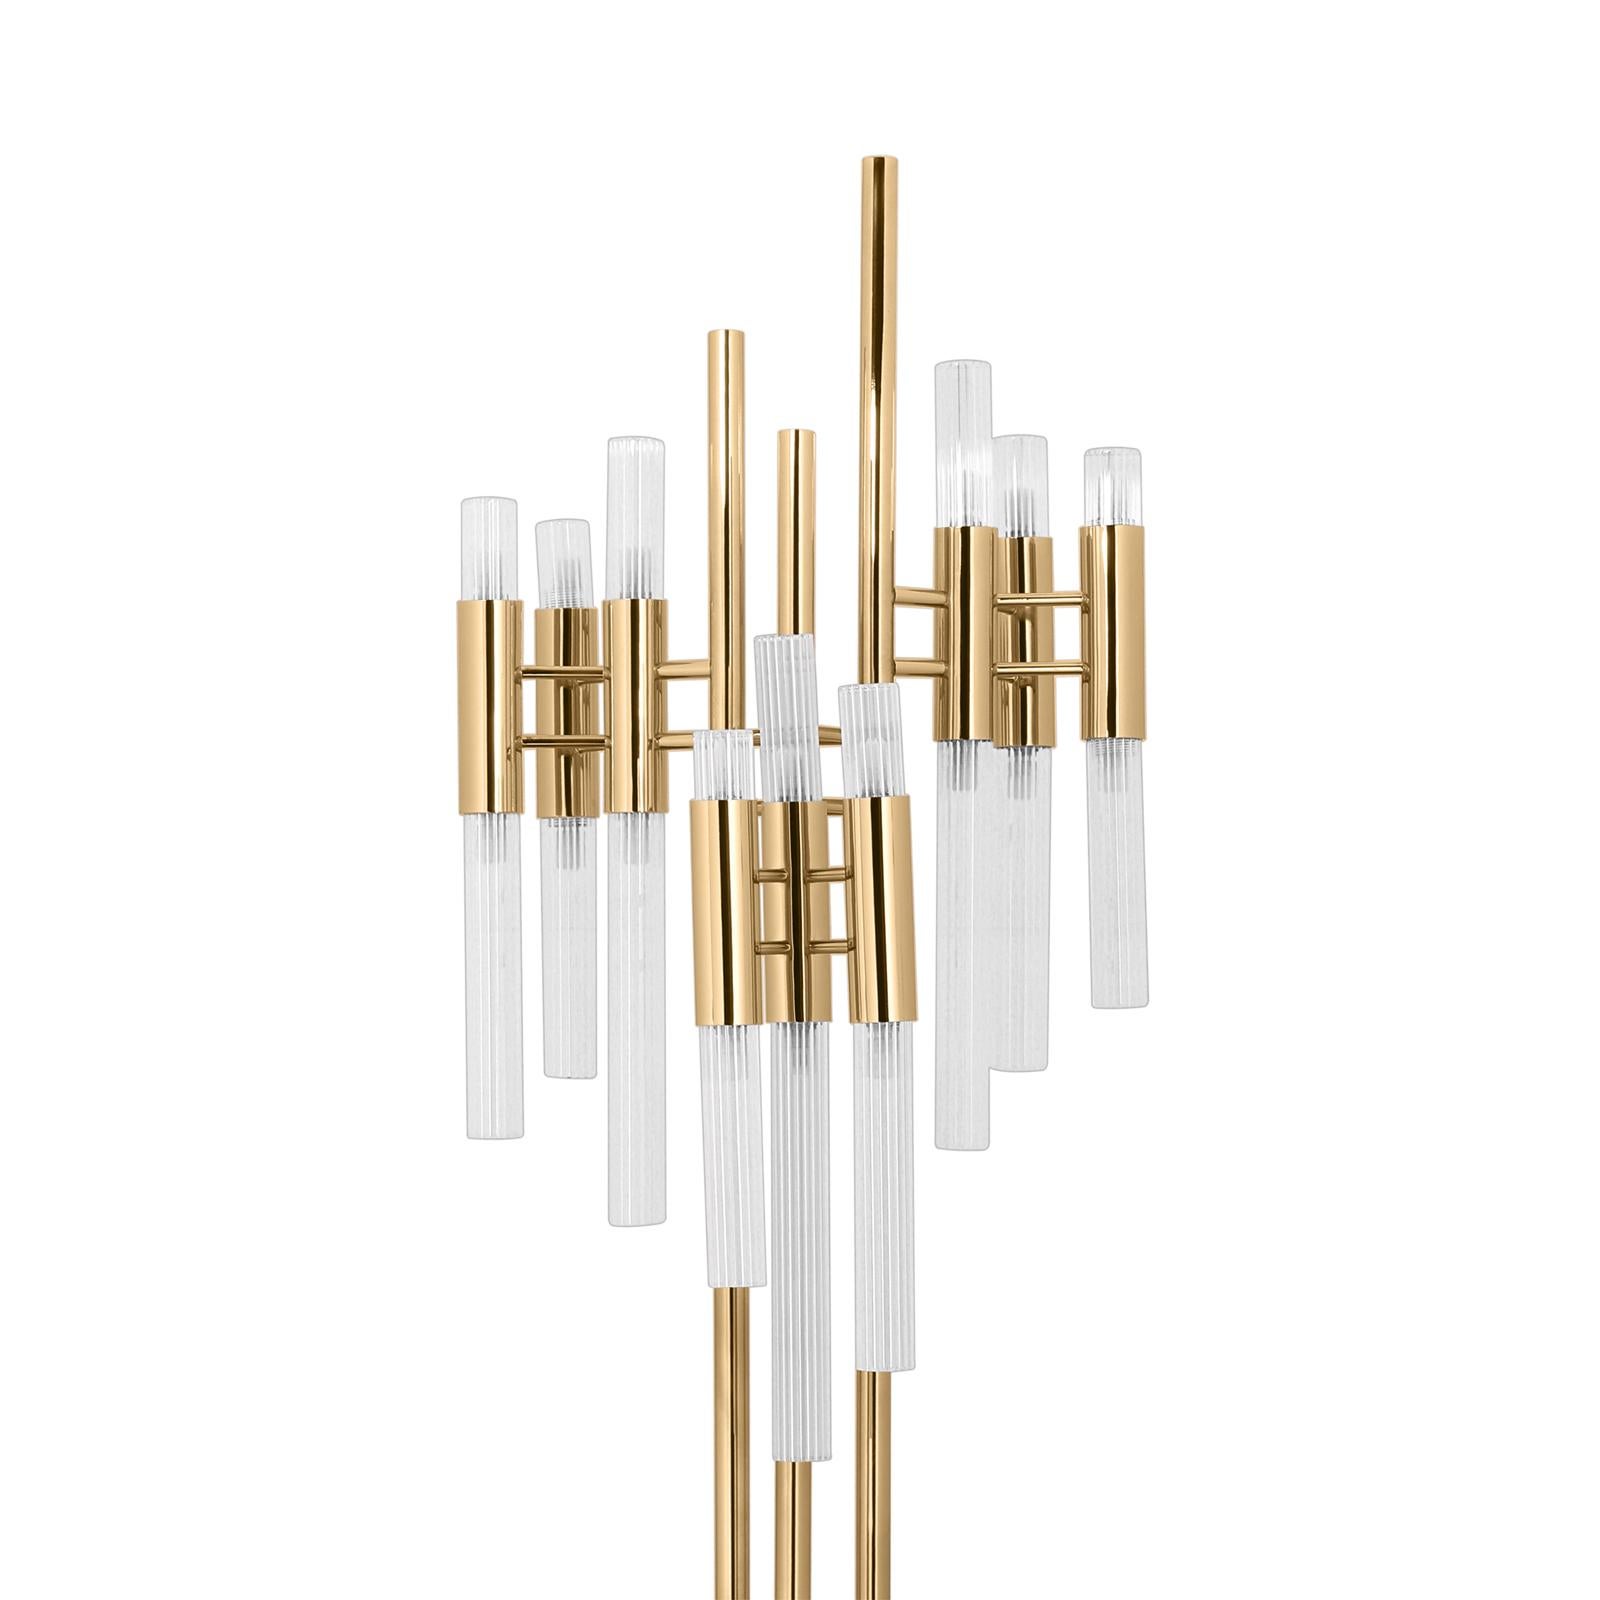 Floor lamp fall with crystal glass tubes and
gold-plated polished brass structure. With
grey Carrara marble ring around basement.
With 18 halogen bulbs, lamp holder type G9.
40 watt max, for 220-240V. Bulbs not included.